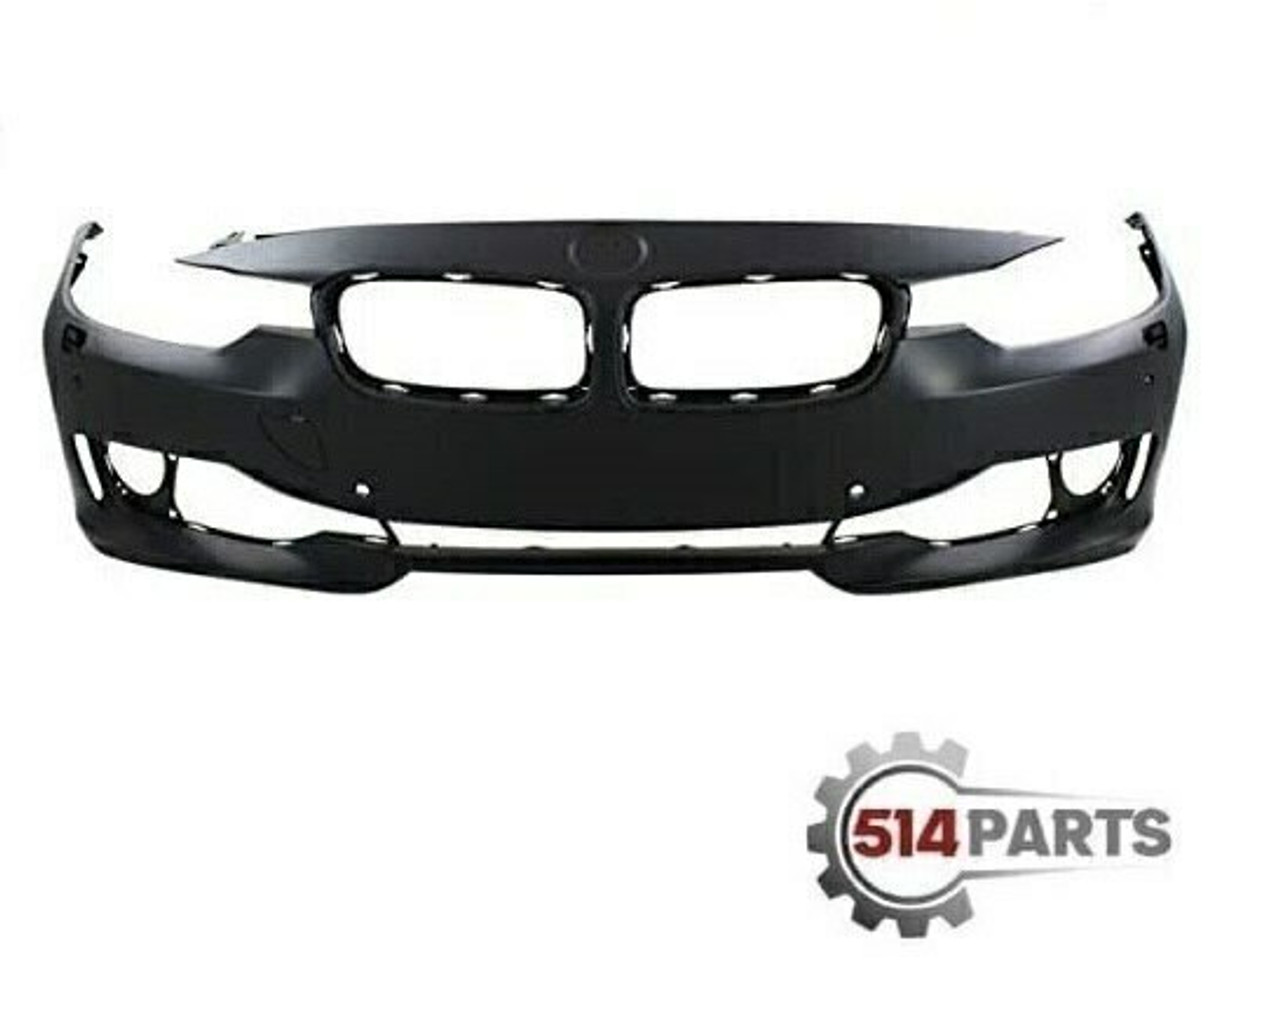 2012 - 2015 BMW 3 SERIES FRONT BUMPER WITH SENSOR NO HEAD LIGHTS WASHER WITH CAMERA WITH PARK DISTANCE CONTROL WITH MOLDING PARE-CHOC AVANT AVEC SENSOR NO LAVE PHARES AVEC CAMERA AVEC PARK DISTANCE CONTROL AVEC MOLDING